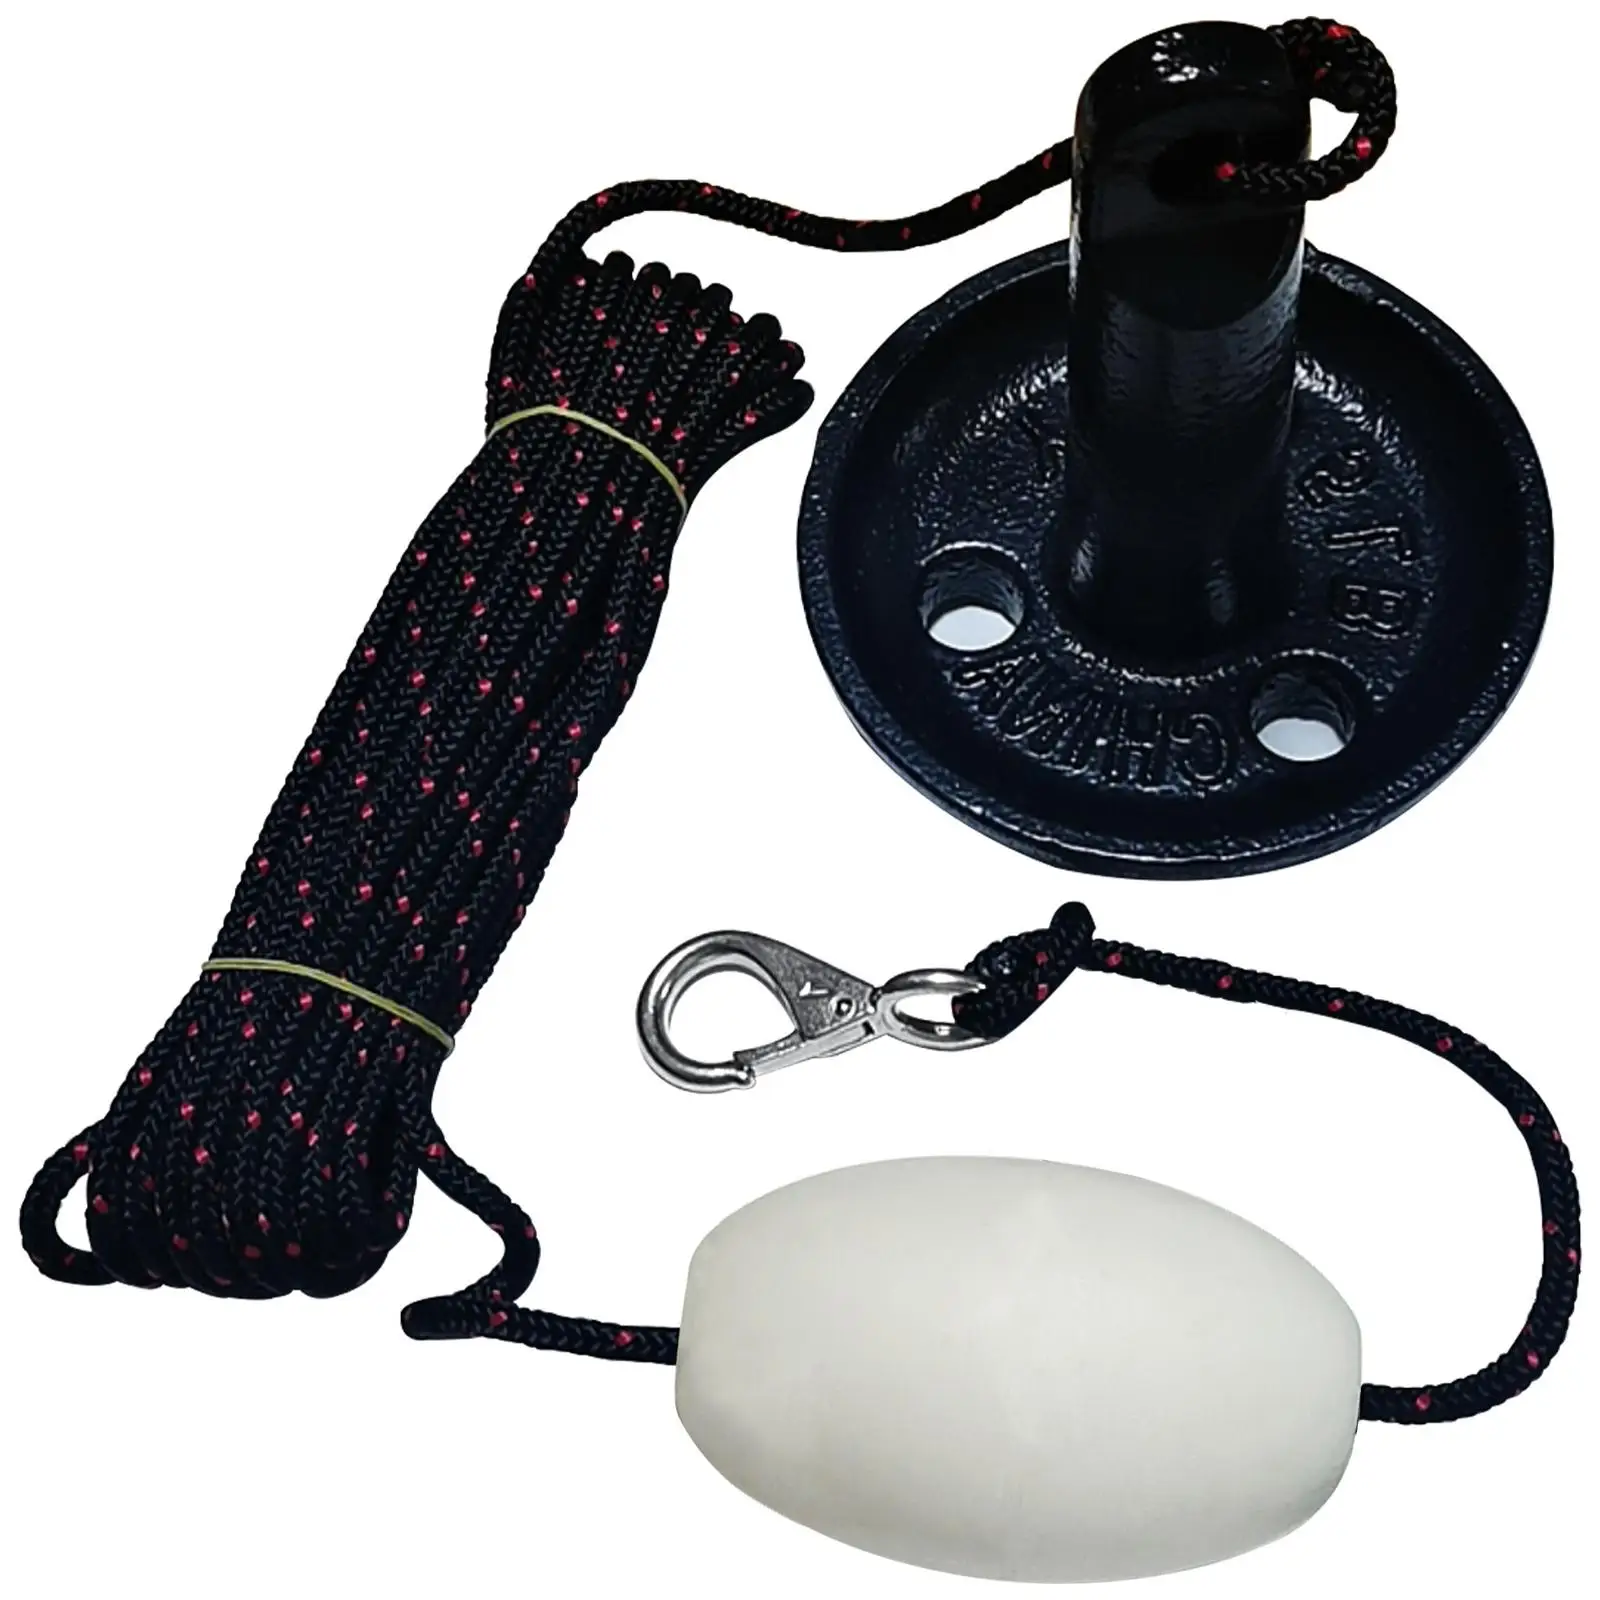 Complete Mushroom Anchor Kit Accessories with Rope Marker Buoy Fit for Paddle Board Canoe